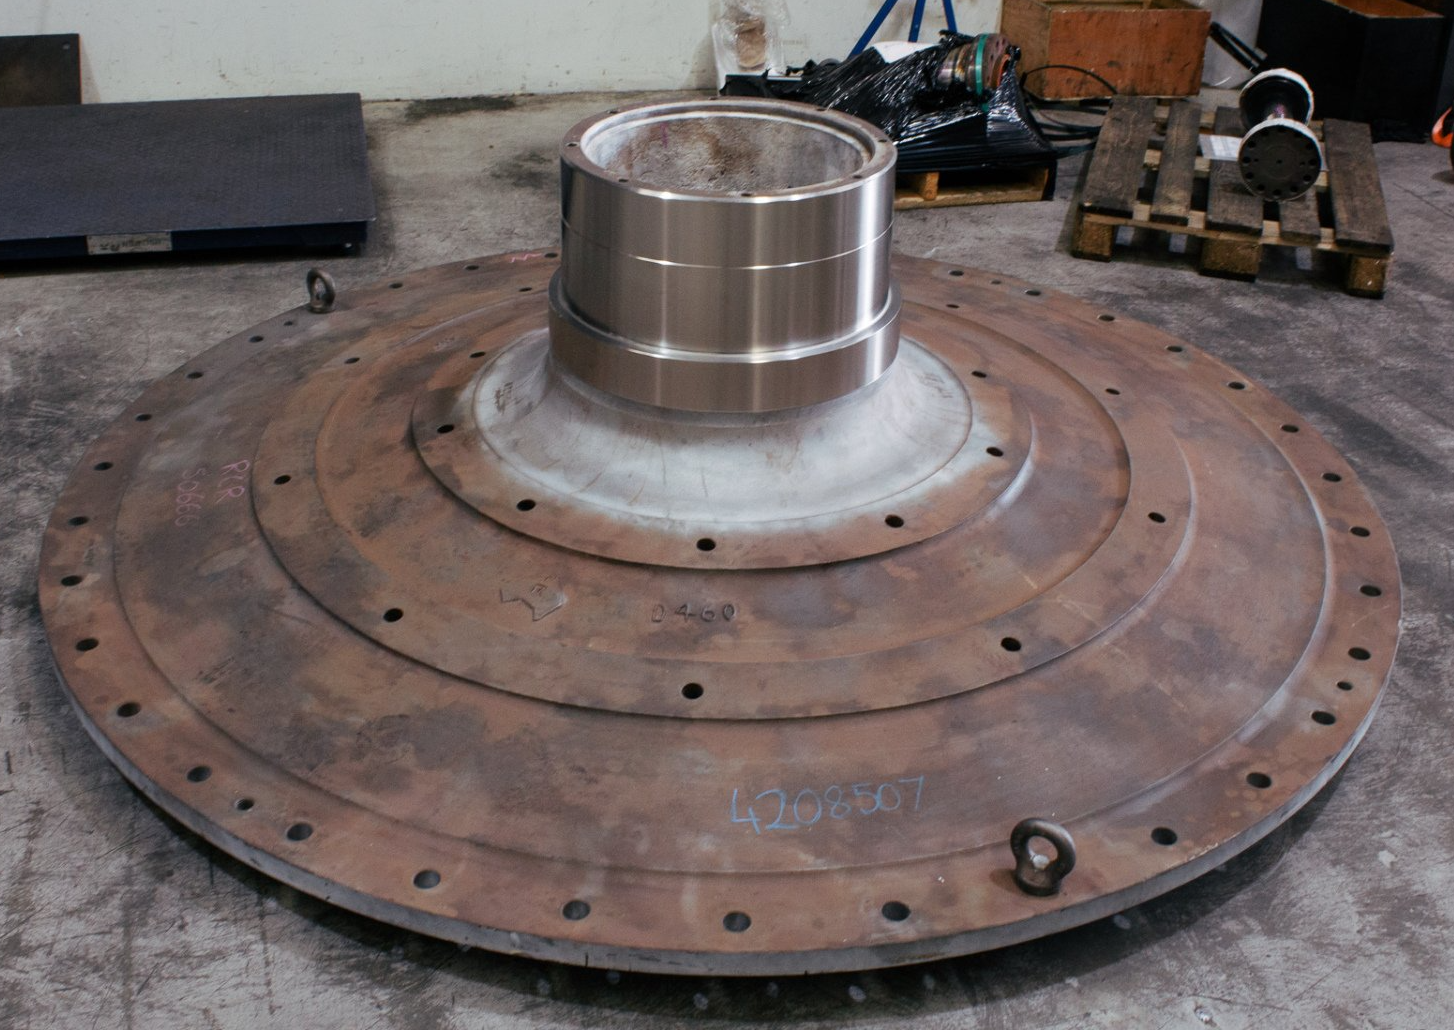 After Mill Trunnion Repair